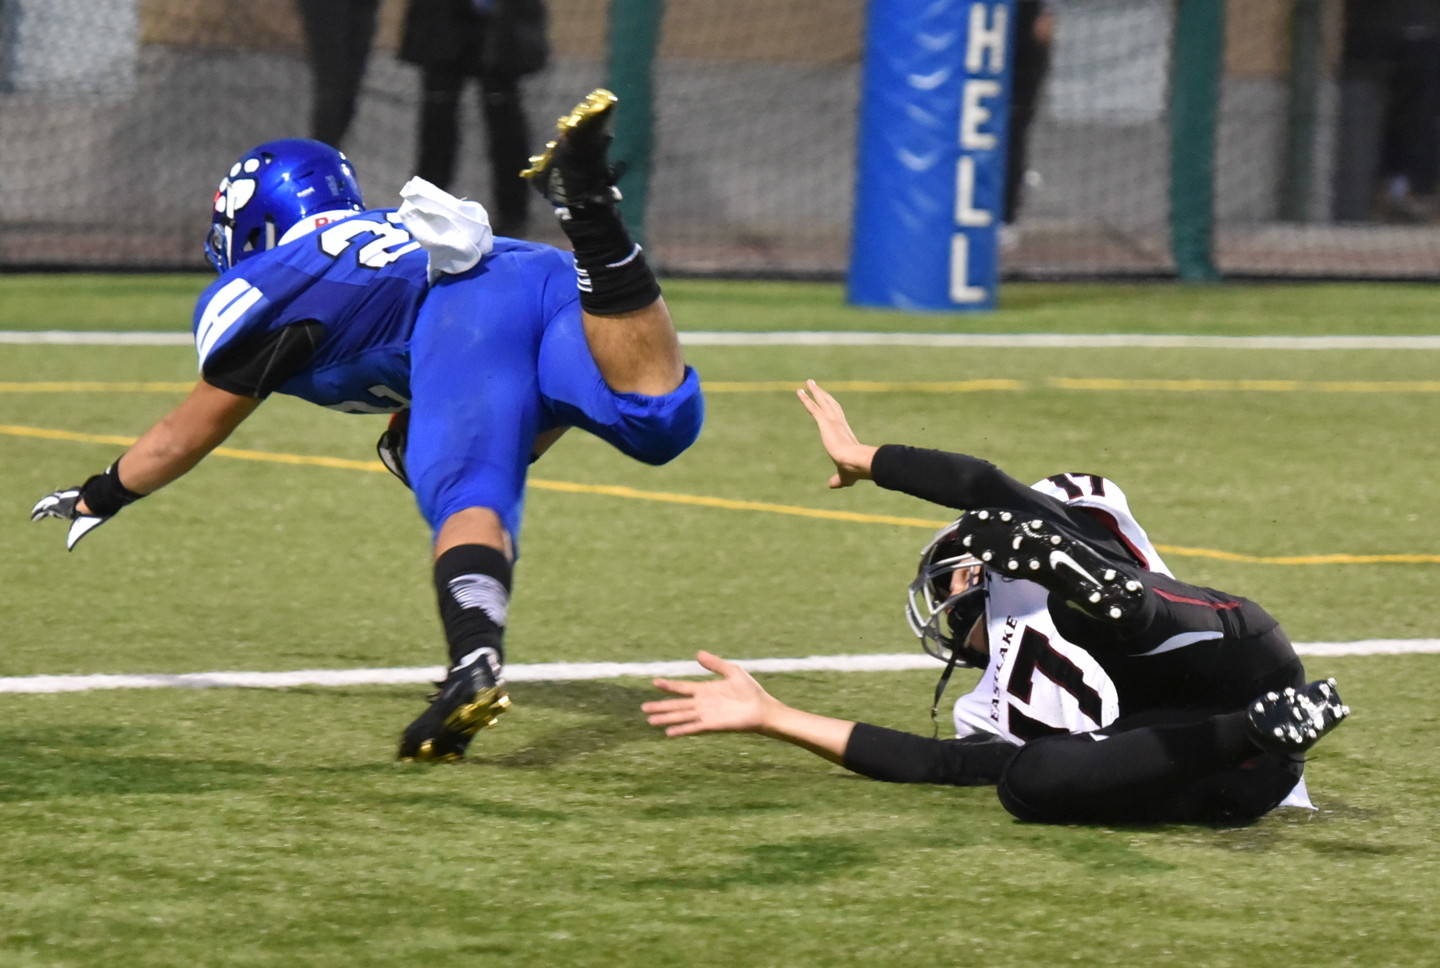 Bothell’s Christian Galvan dives into the end zone to complete his 98-yard kickoff return to begin last Saturday’s game. Courtesy of Greg Nelson